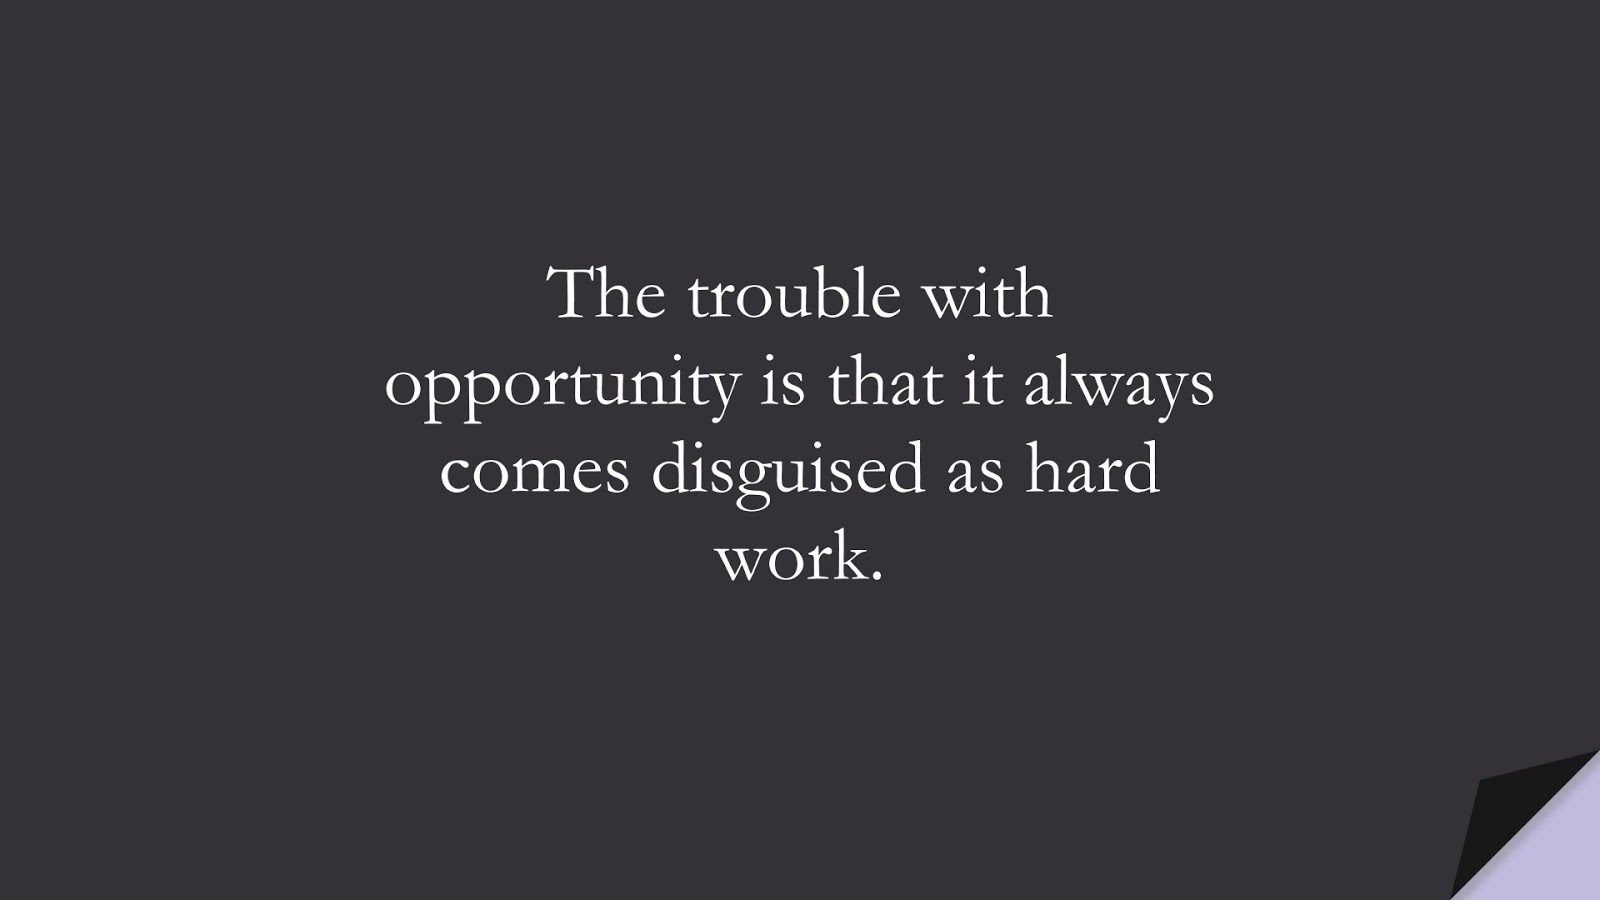 The trouble with opportunity is that it always comes disguised as hard work.FALSE